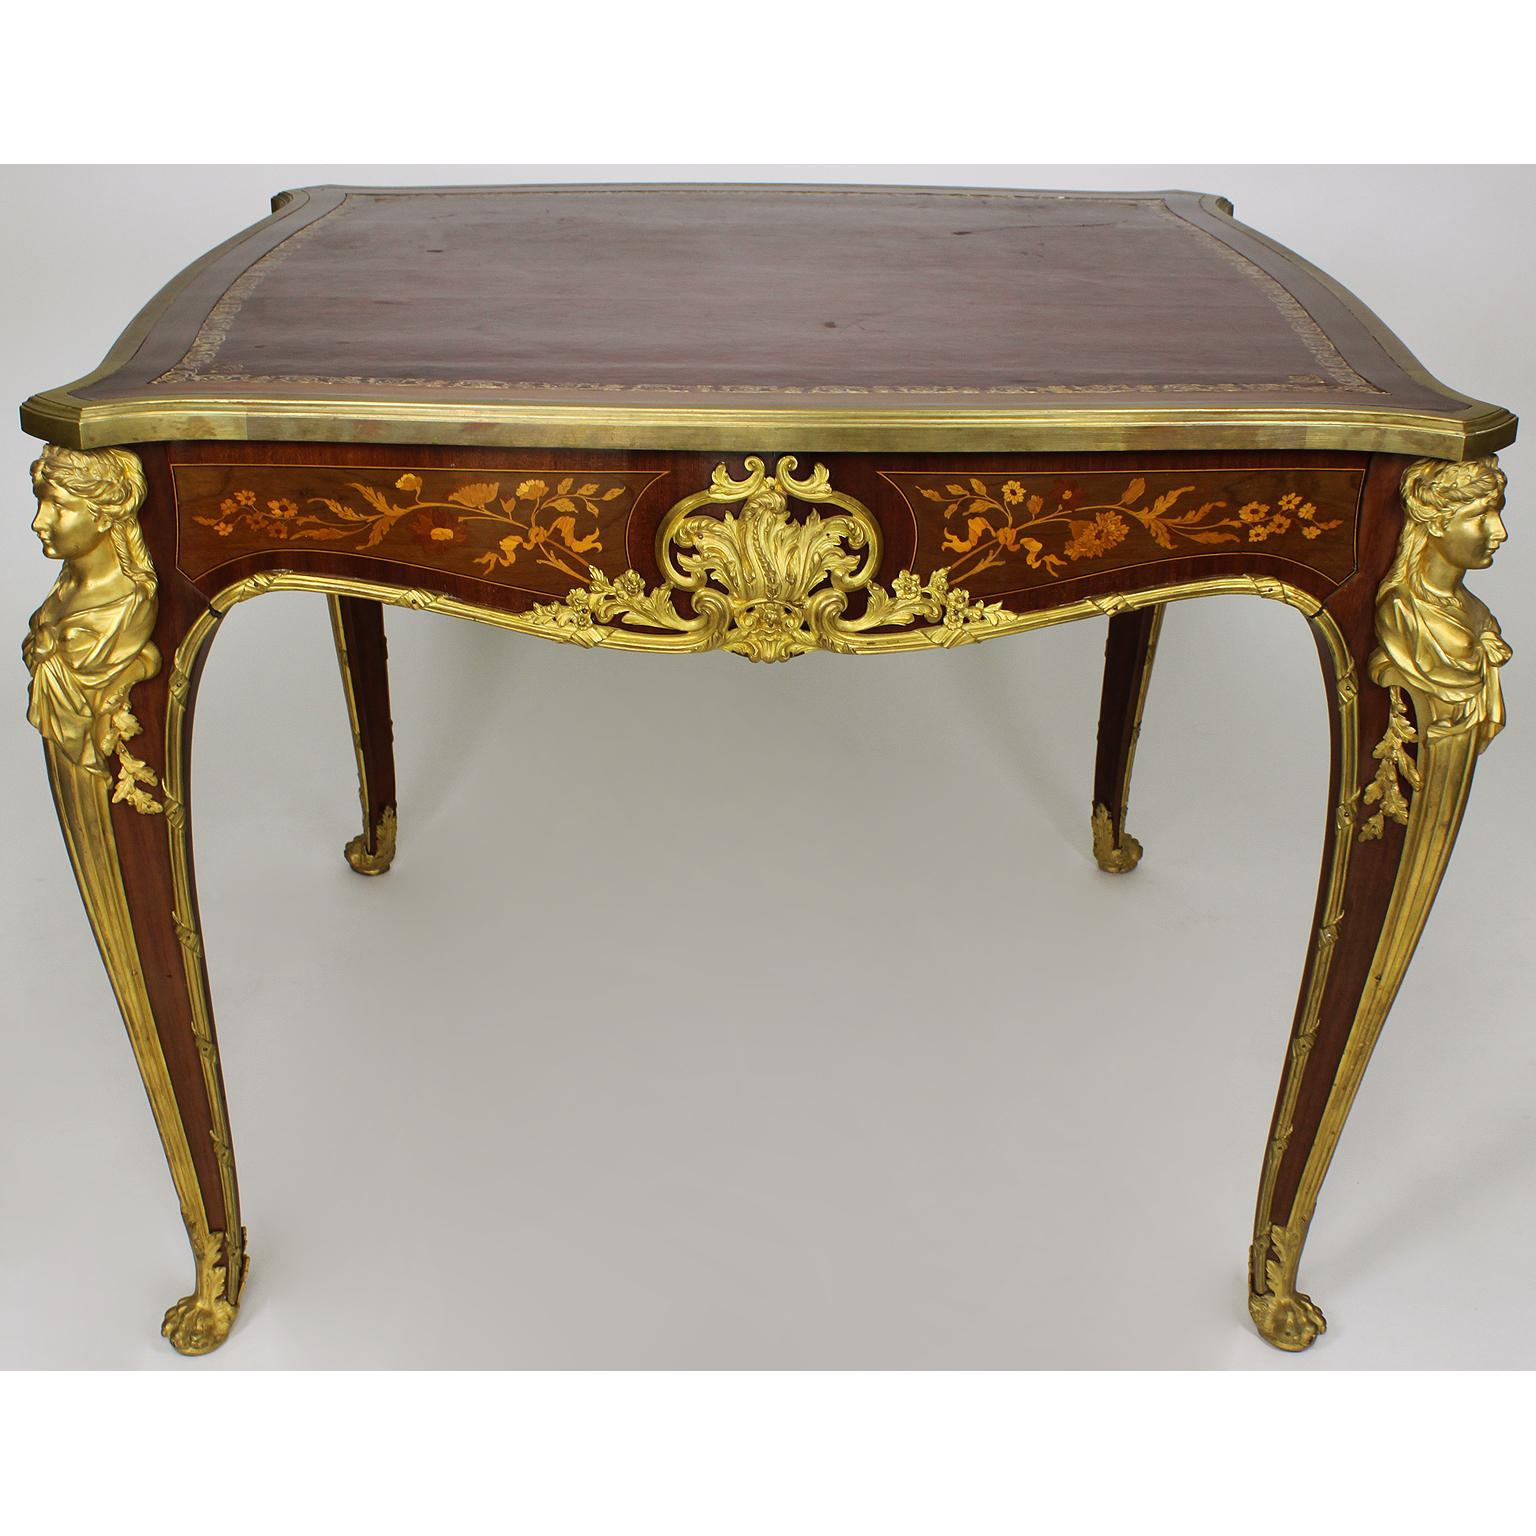 A very fine French 19th-20th century Louis XV style mahogany, satinwood and Kingwood marquetry ormolu mounted figural game table, attributed to François Linke (1855-1946). The square body surmounted with female ormolu caryatids on each corner, on